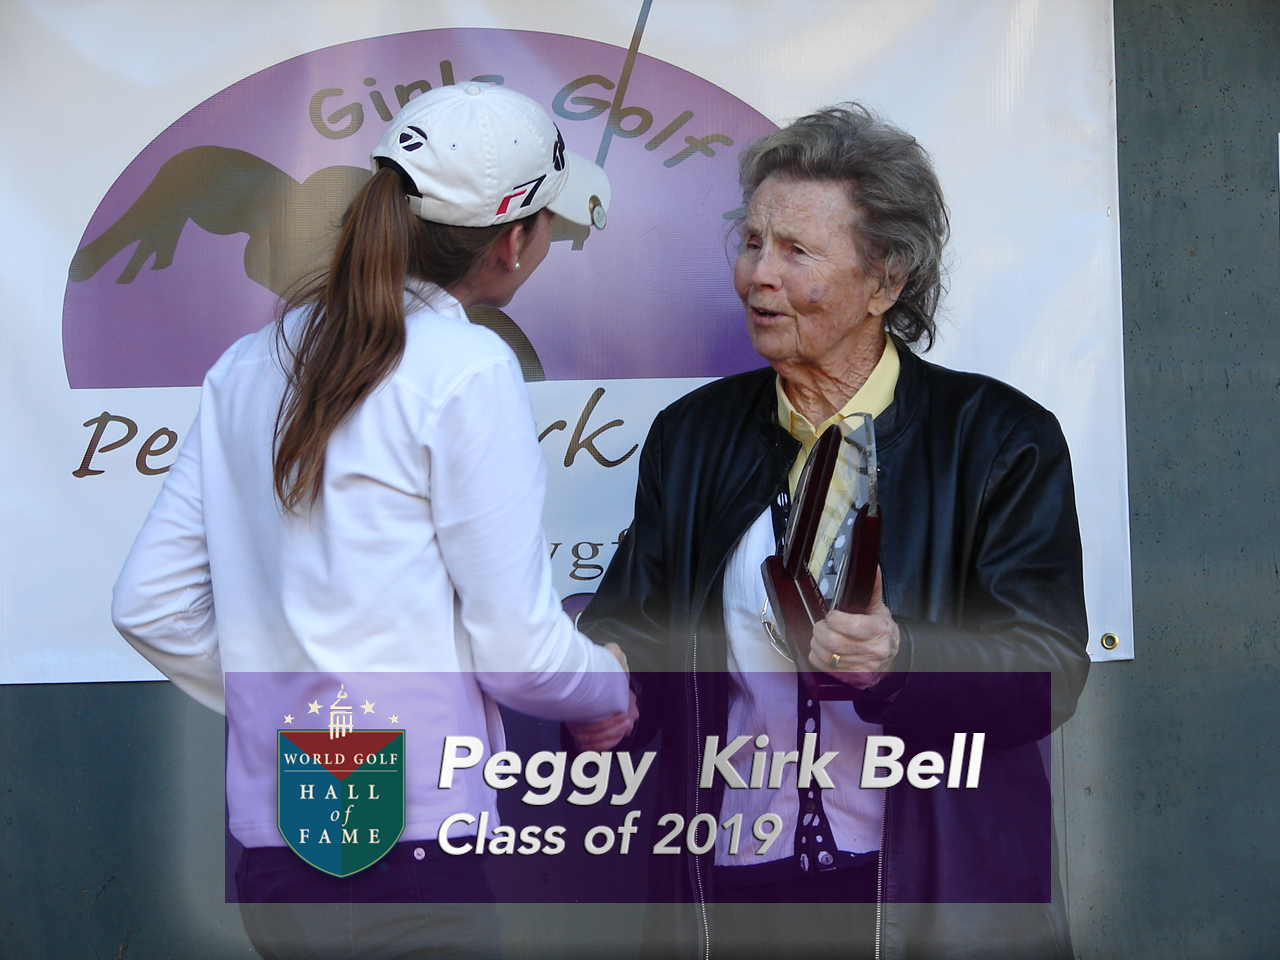 Peggy Kirk Bell Named to World Golf Hall of Fame